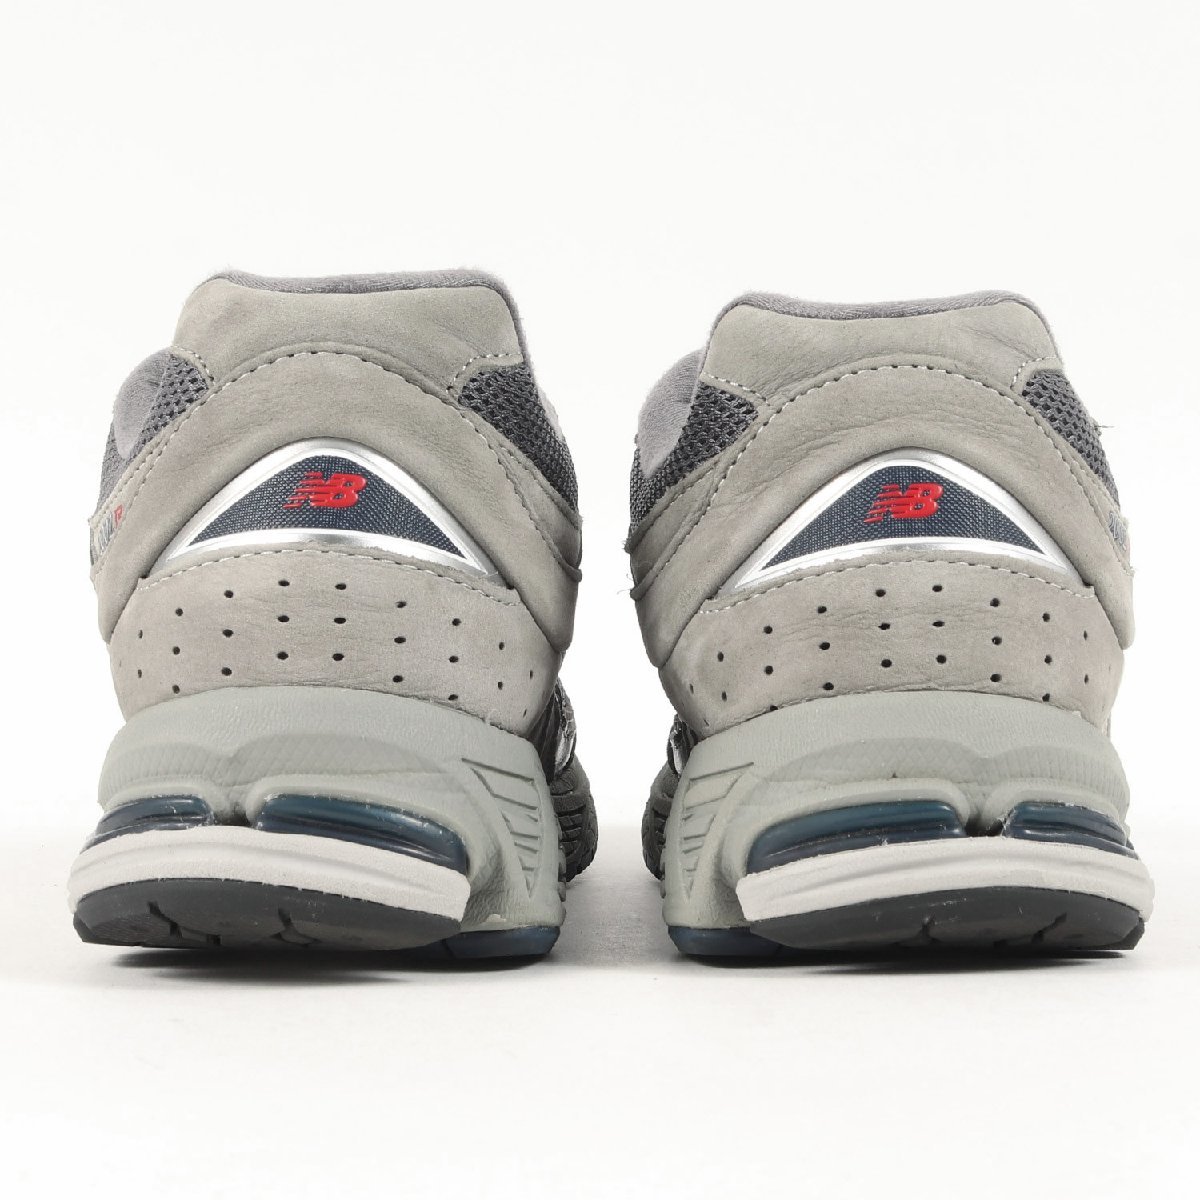 NEW BALANCE New balance size :28.0cm ML2002 RA 2022 year made dark gray US10 D low cut sneakers shoes shoes brand 